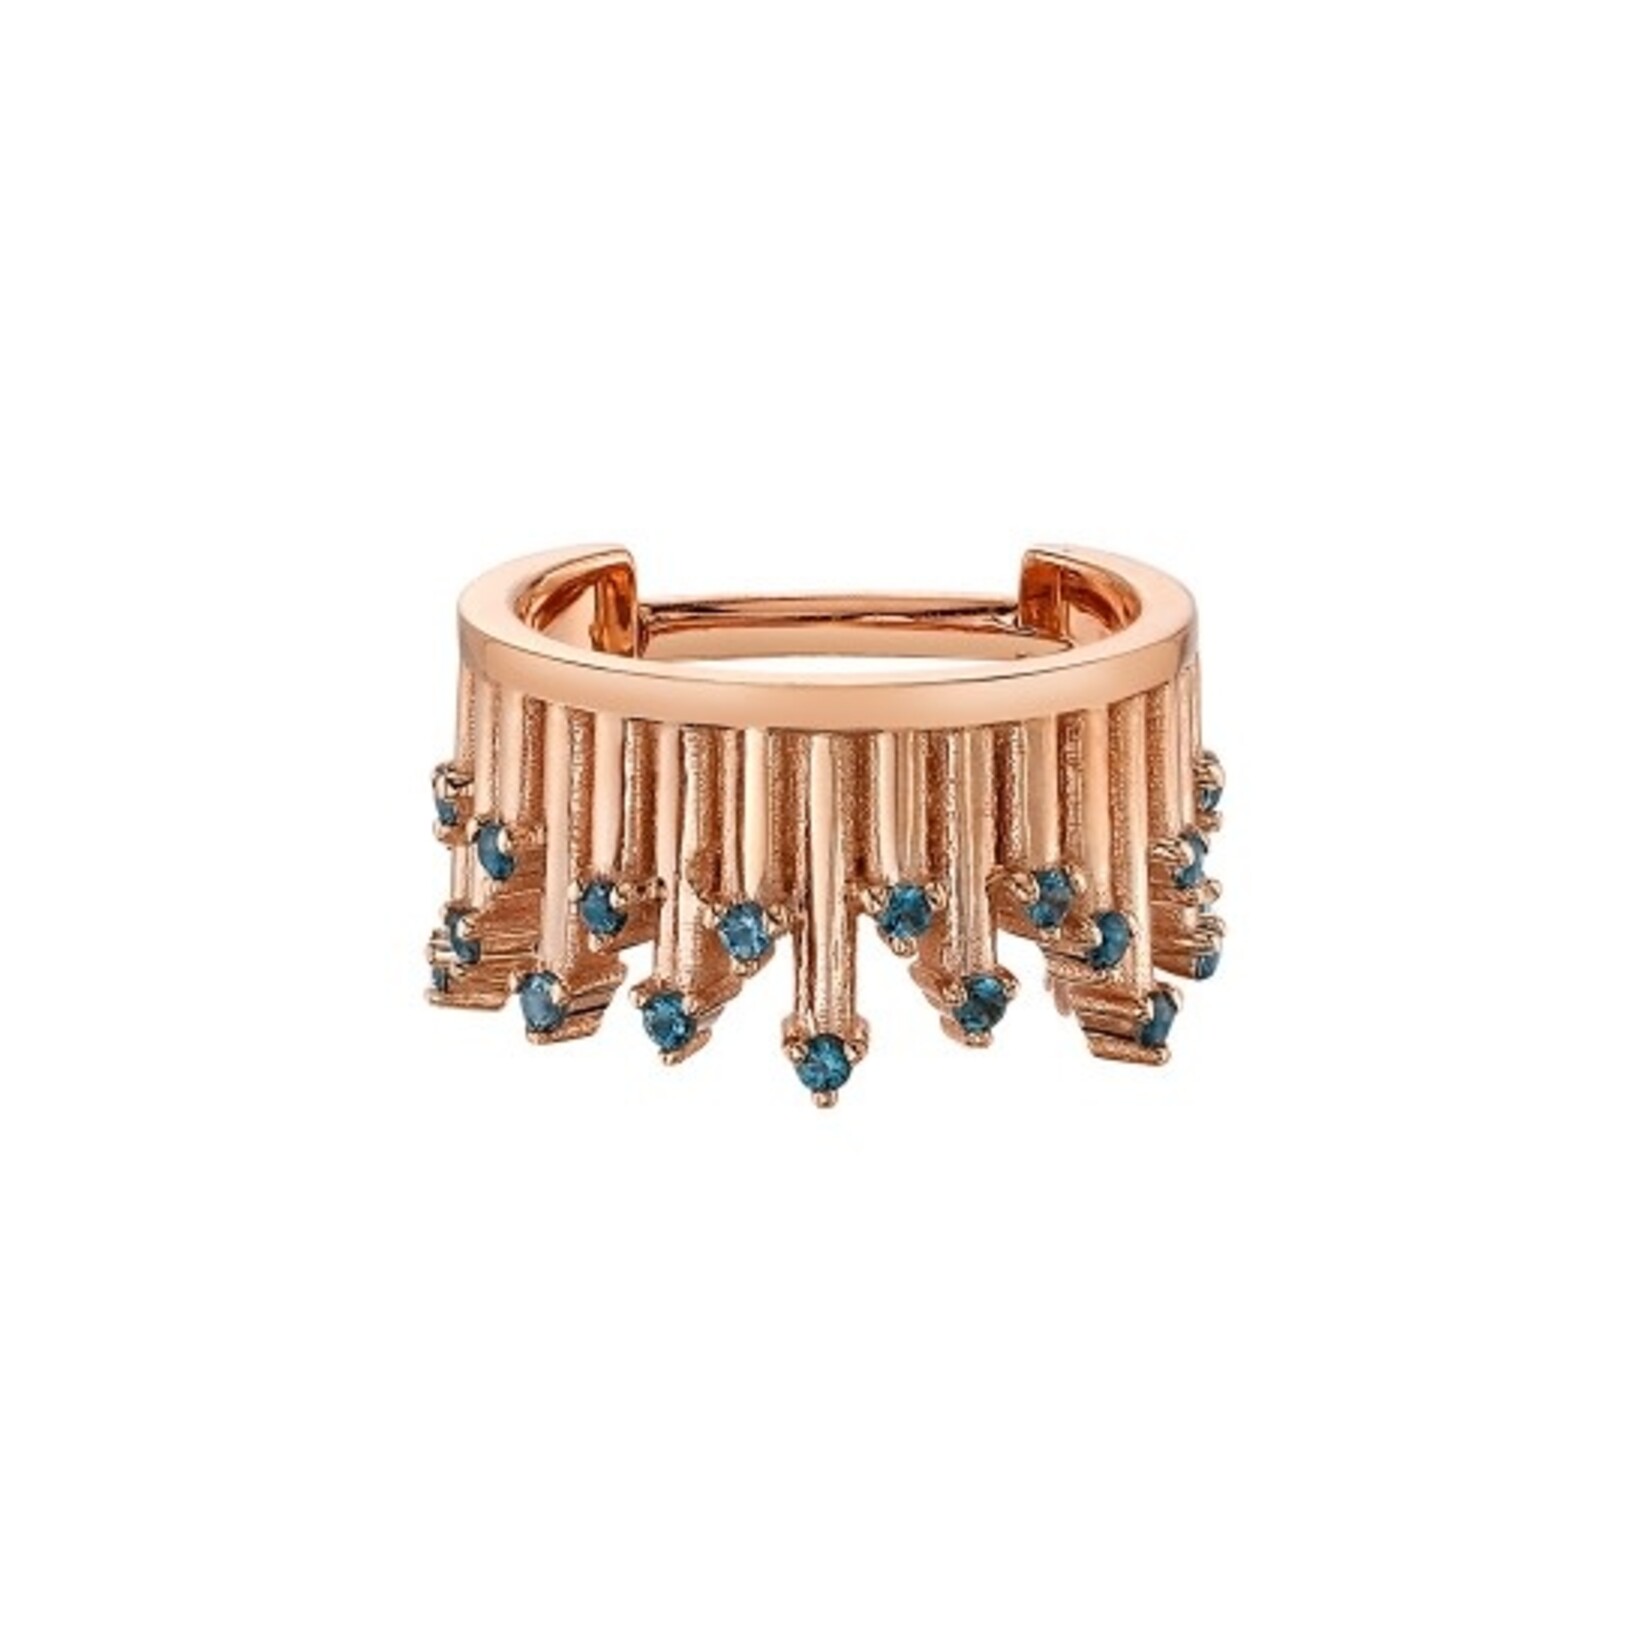 BVLA BVLA 16g 11/32 rose gold "Take a Bow" chandelier clicker with 23x 1.0 AA London Blue Topaz